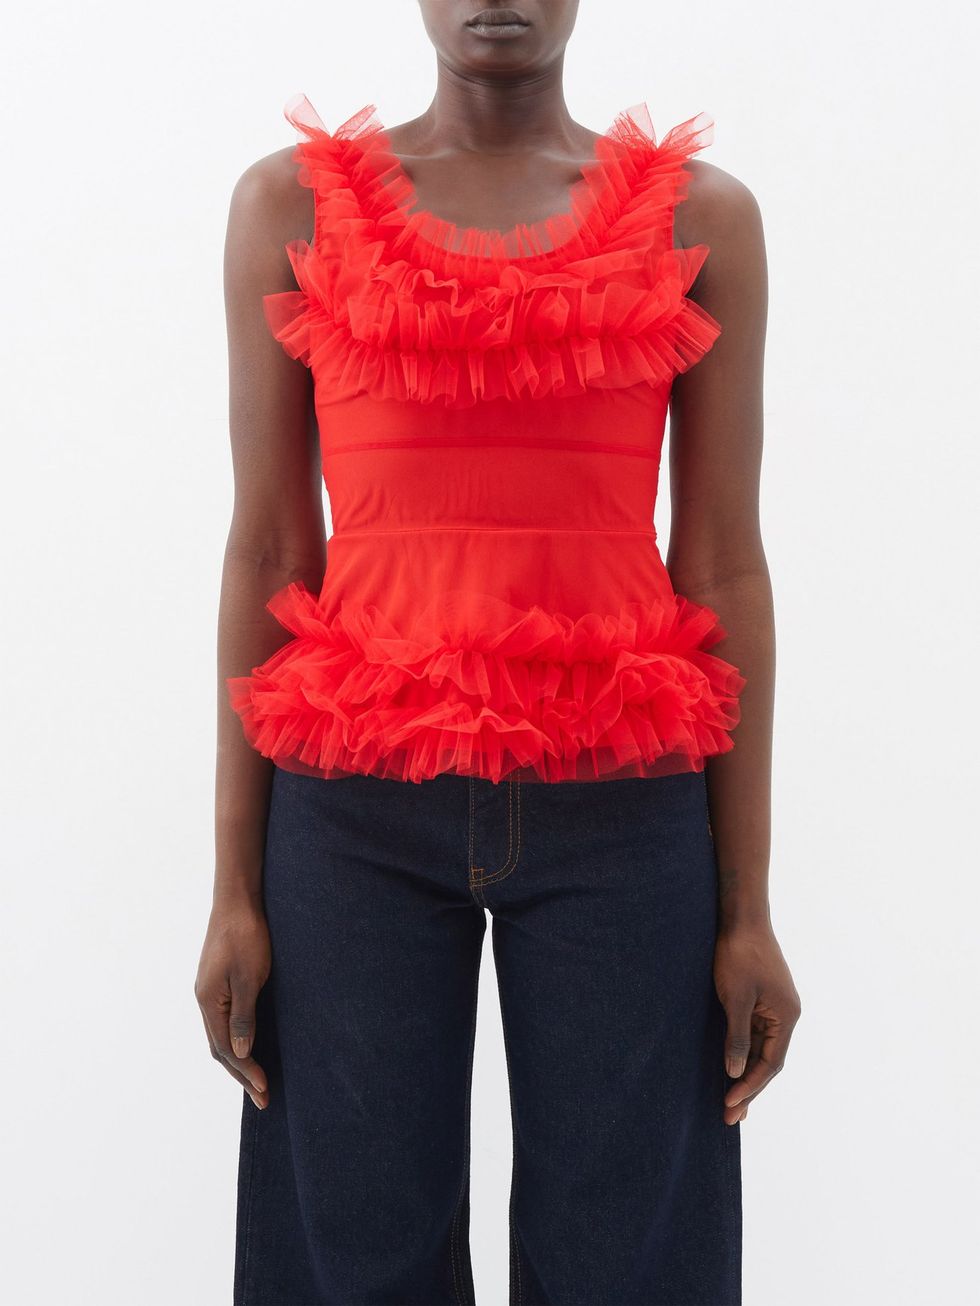 Scoop neck ruffled tulle top from Clarisse